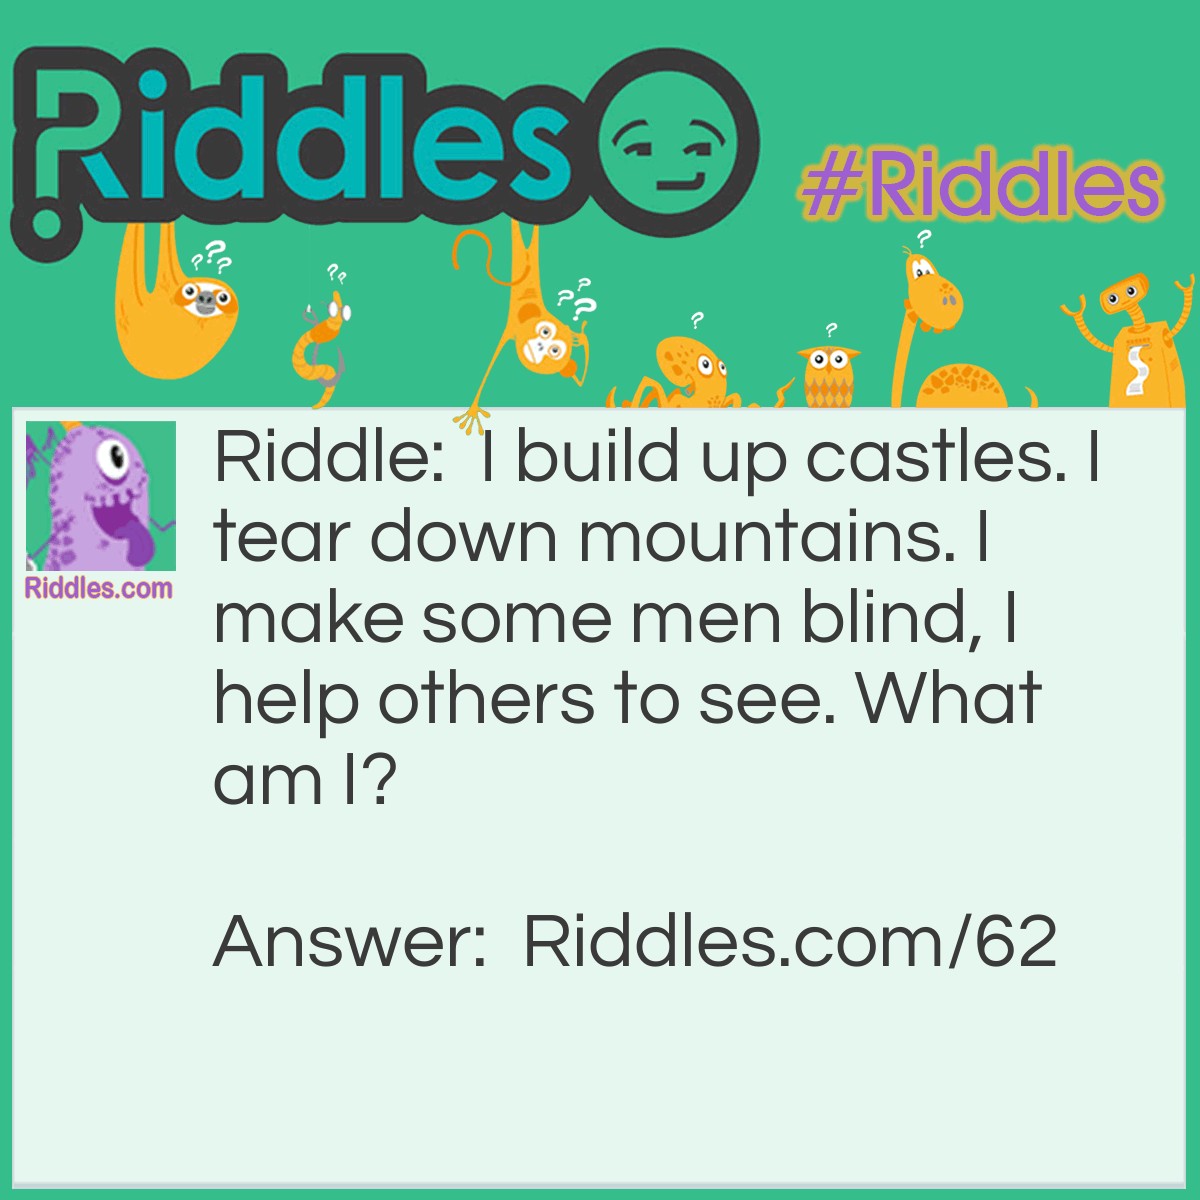 Riddle: I build up castles. I tear down mountains. I make some men blind, I help others to see. What am I? Answer: I am Sand.